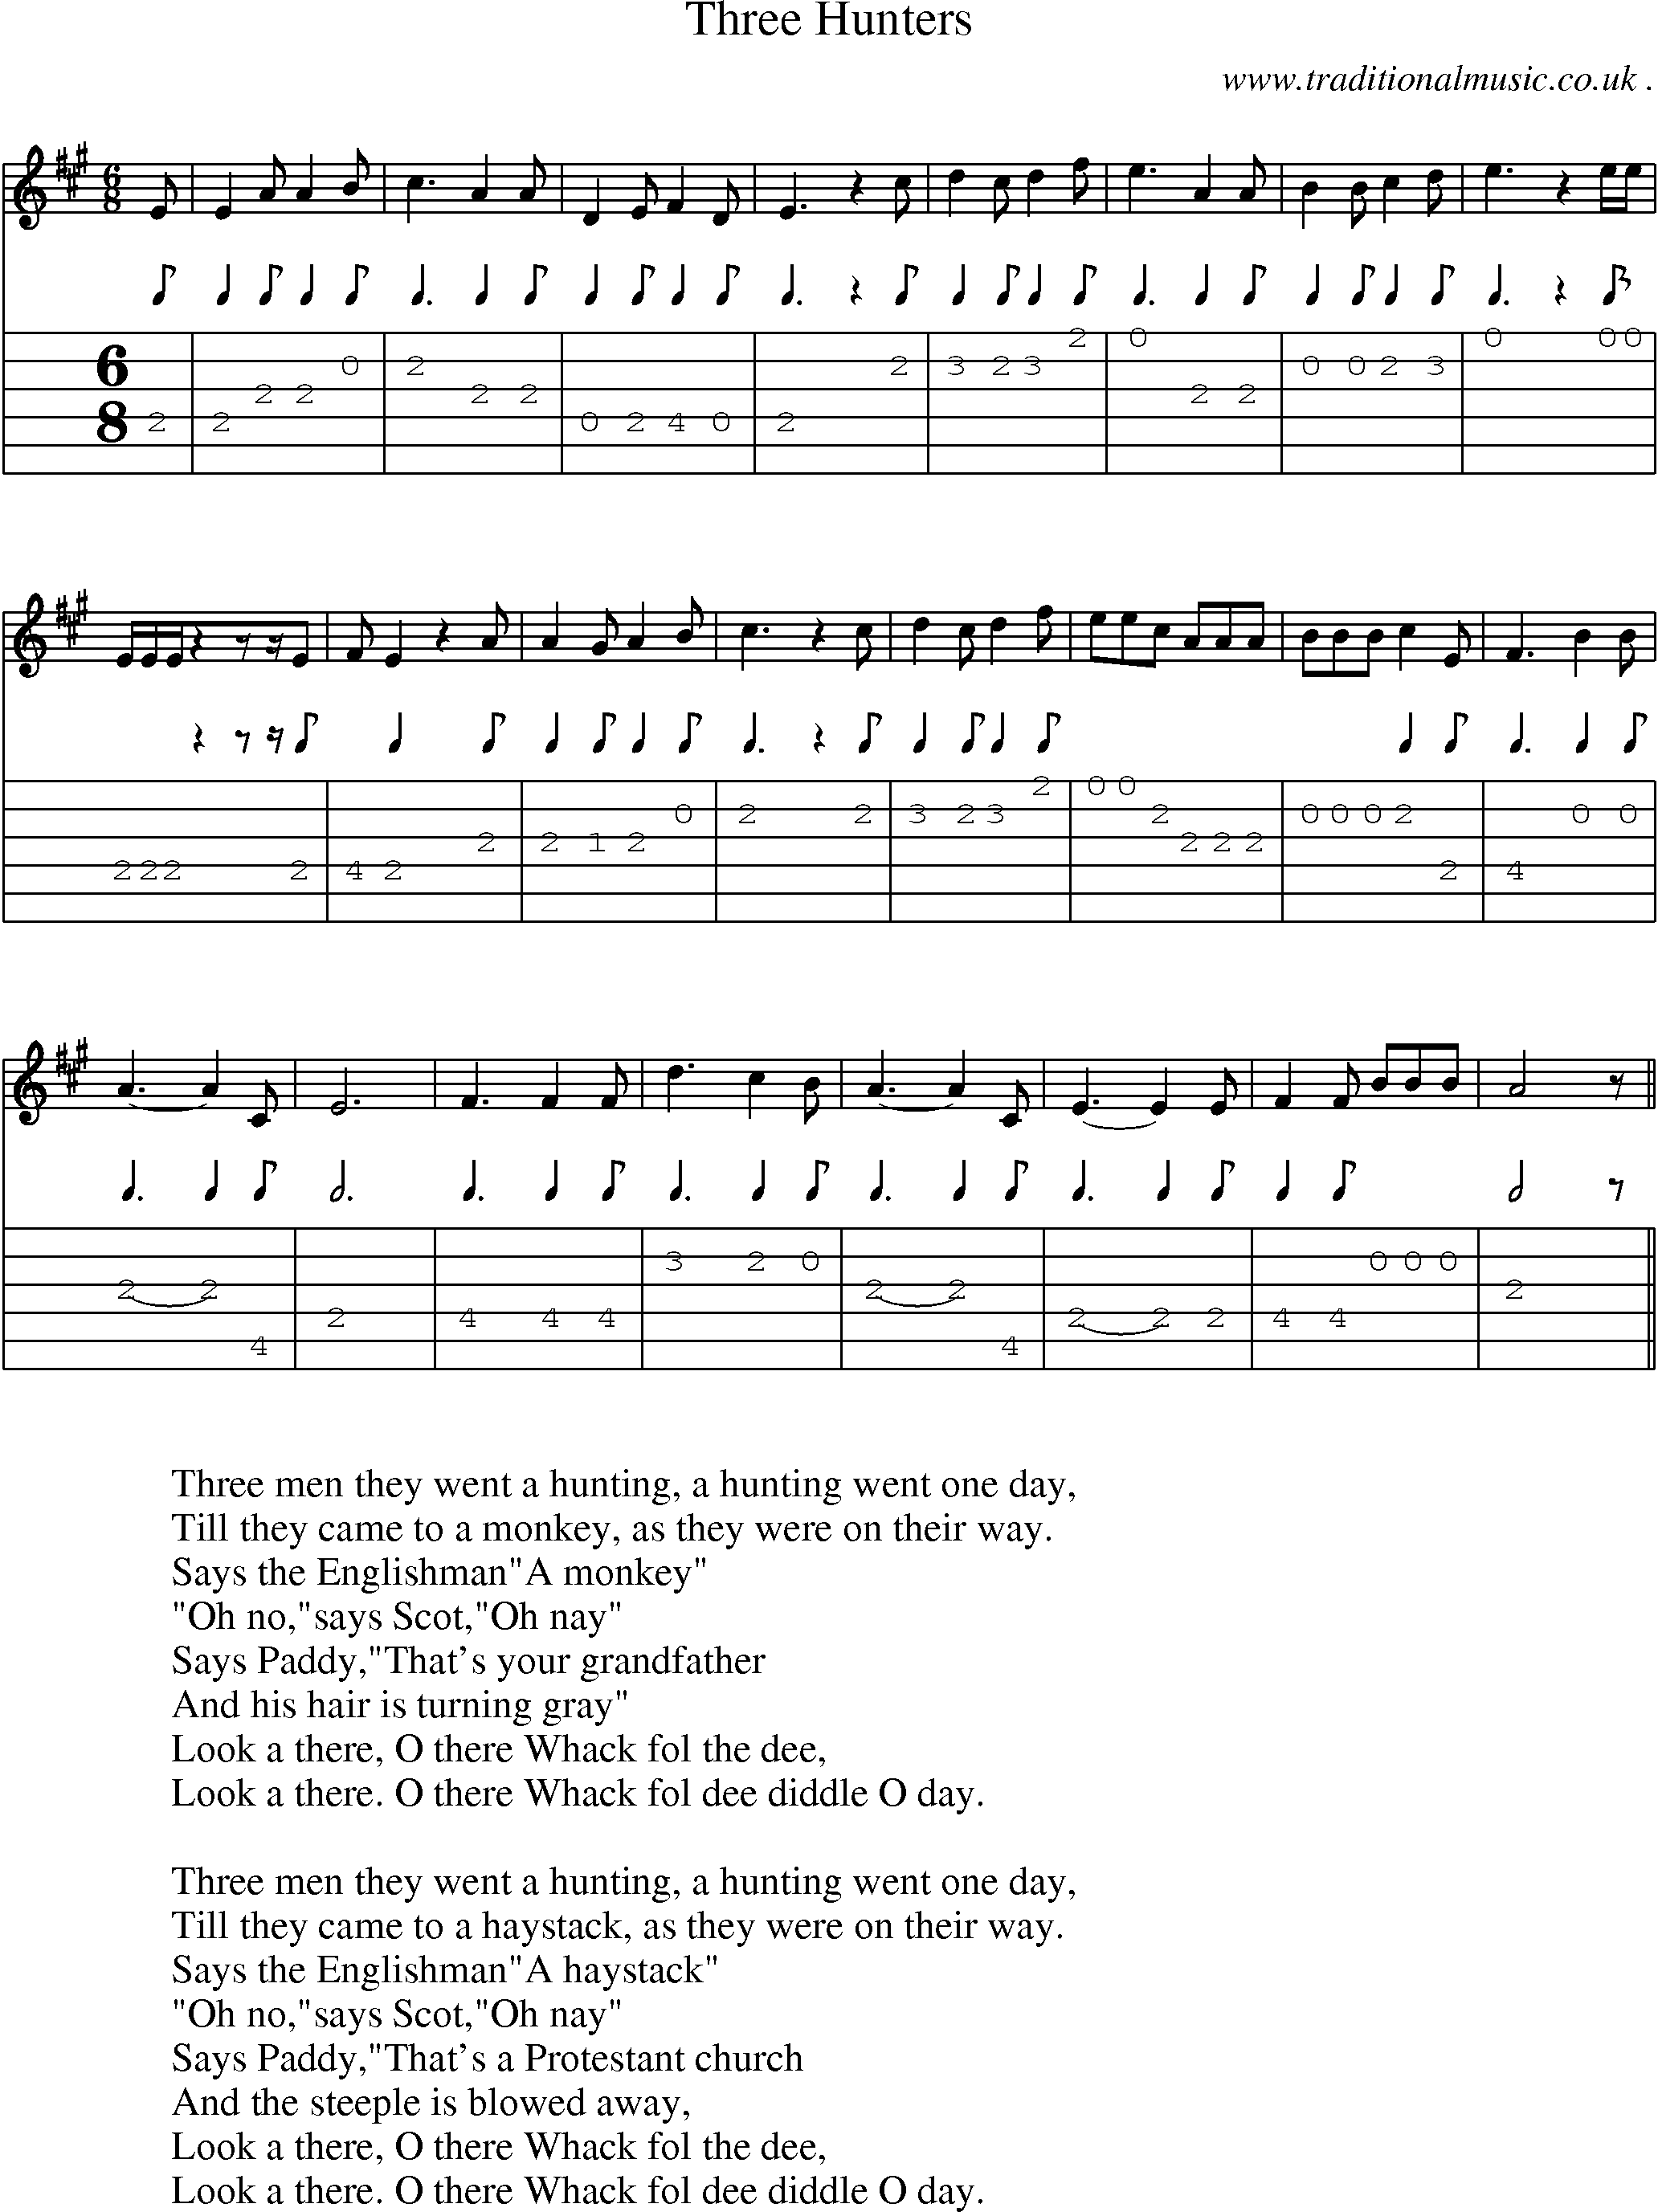 Sheet-Music and Guitar Tabs for Three Hunters